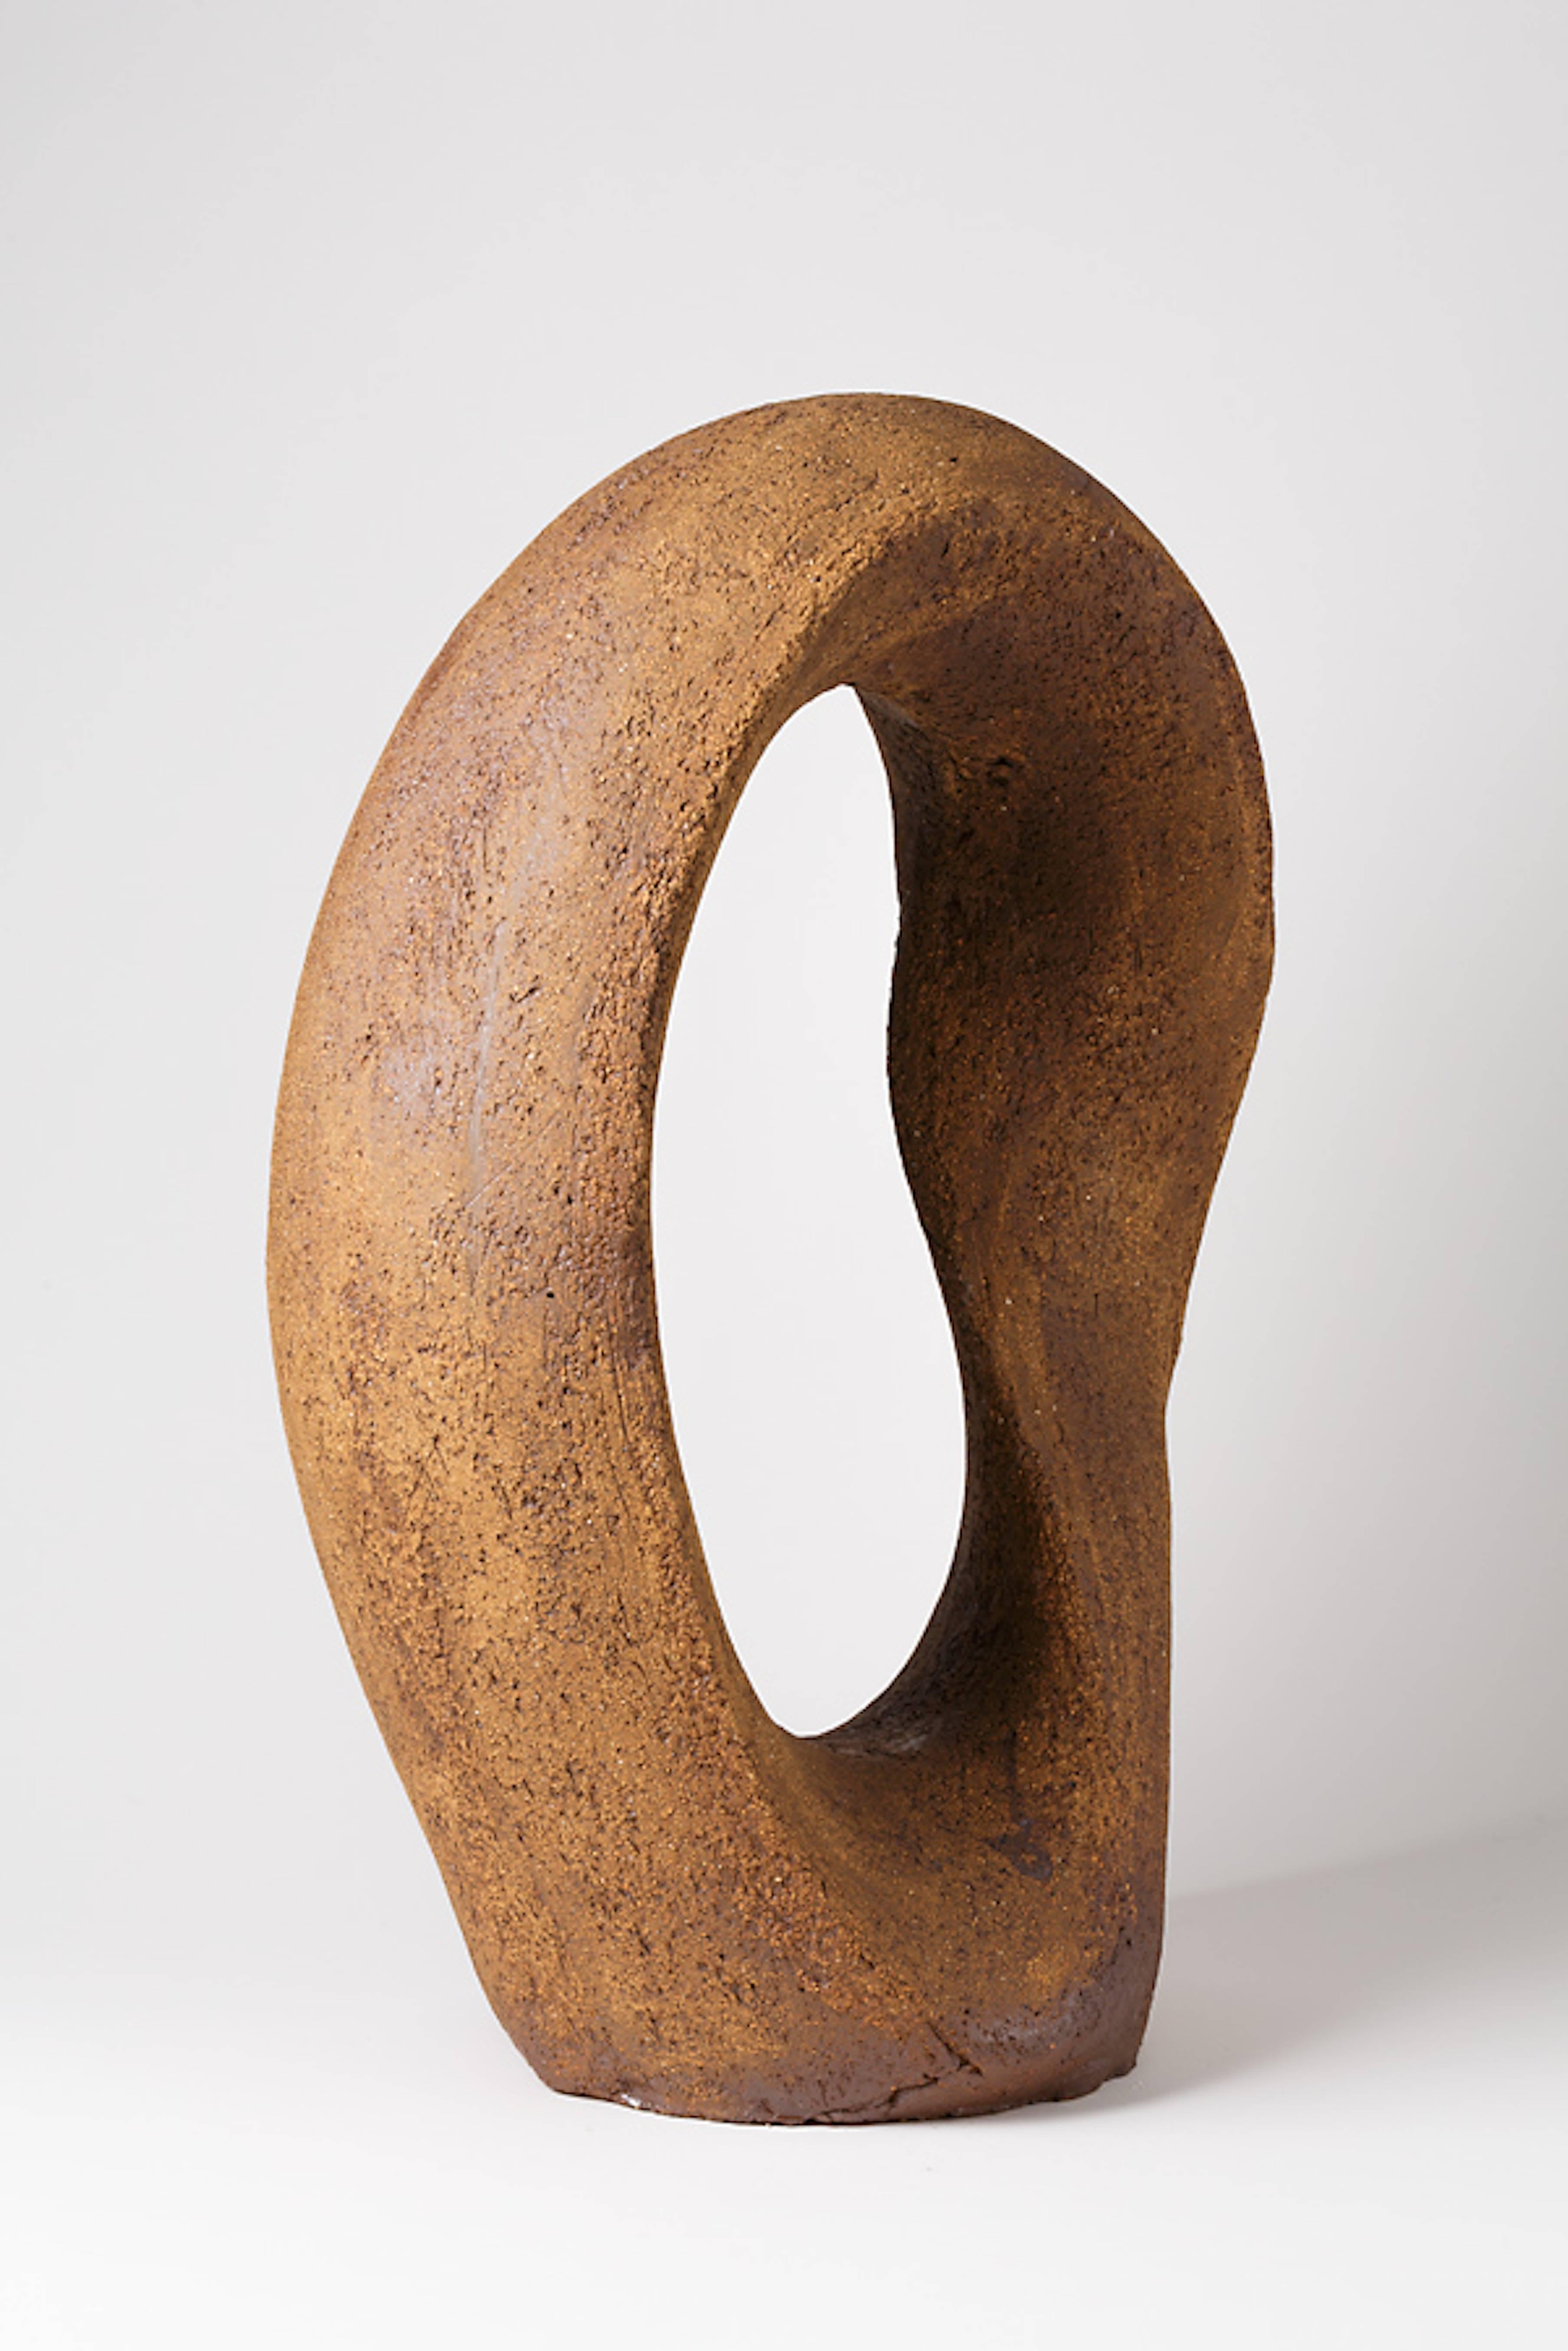 20th Century Important Stoneware Sculpture by Tim Orr, circa 1970-1980 For Sale